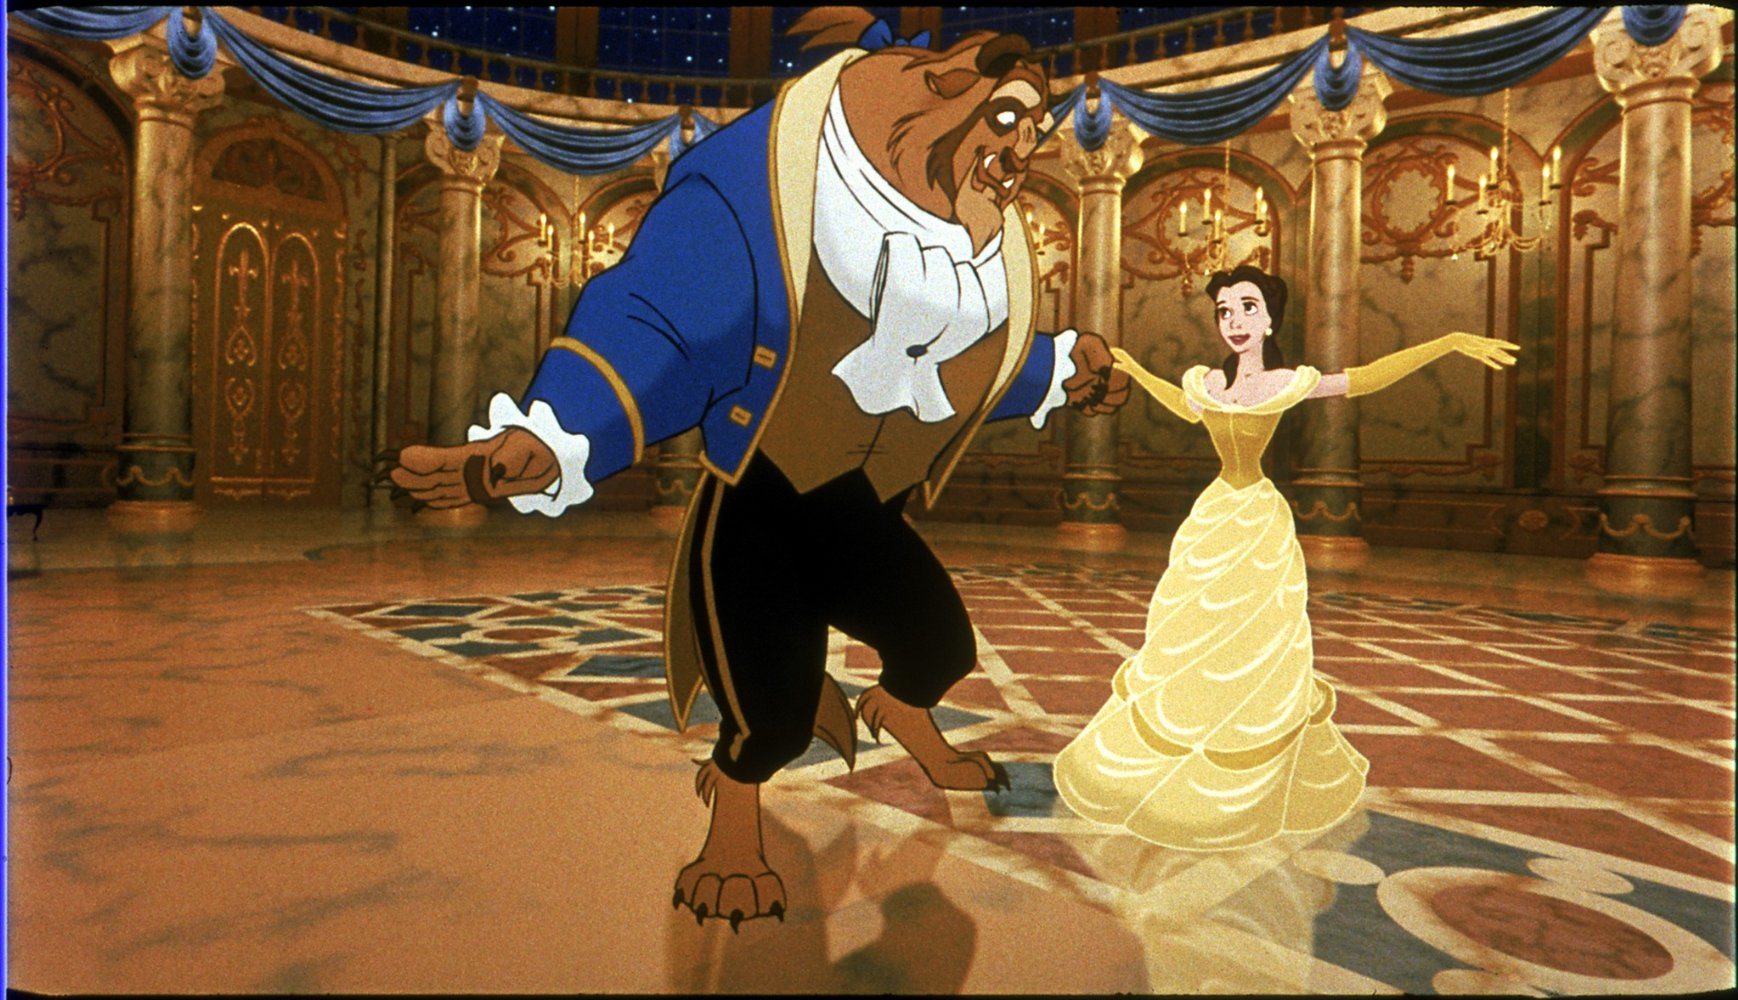 Enjoy The Magic Of Disney S Beauty And The Beast On Digital And Blu